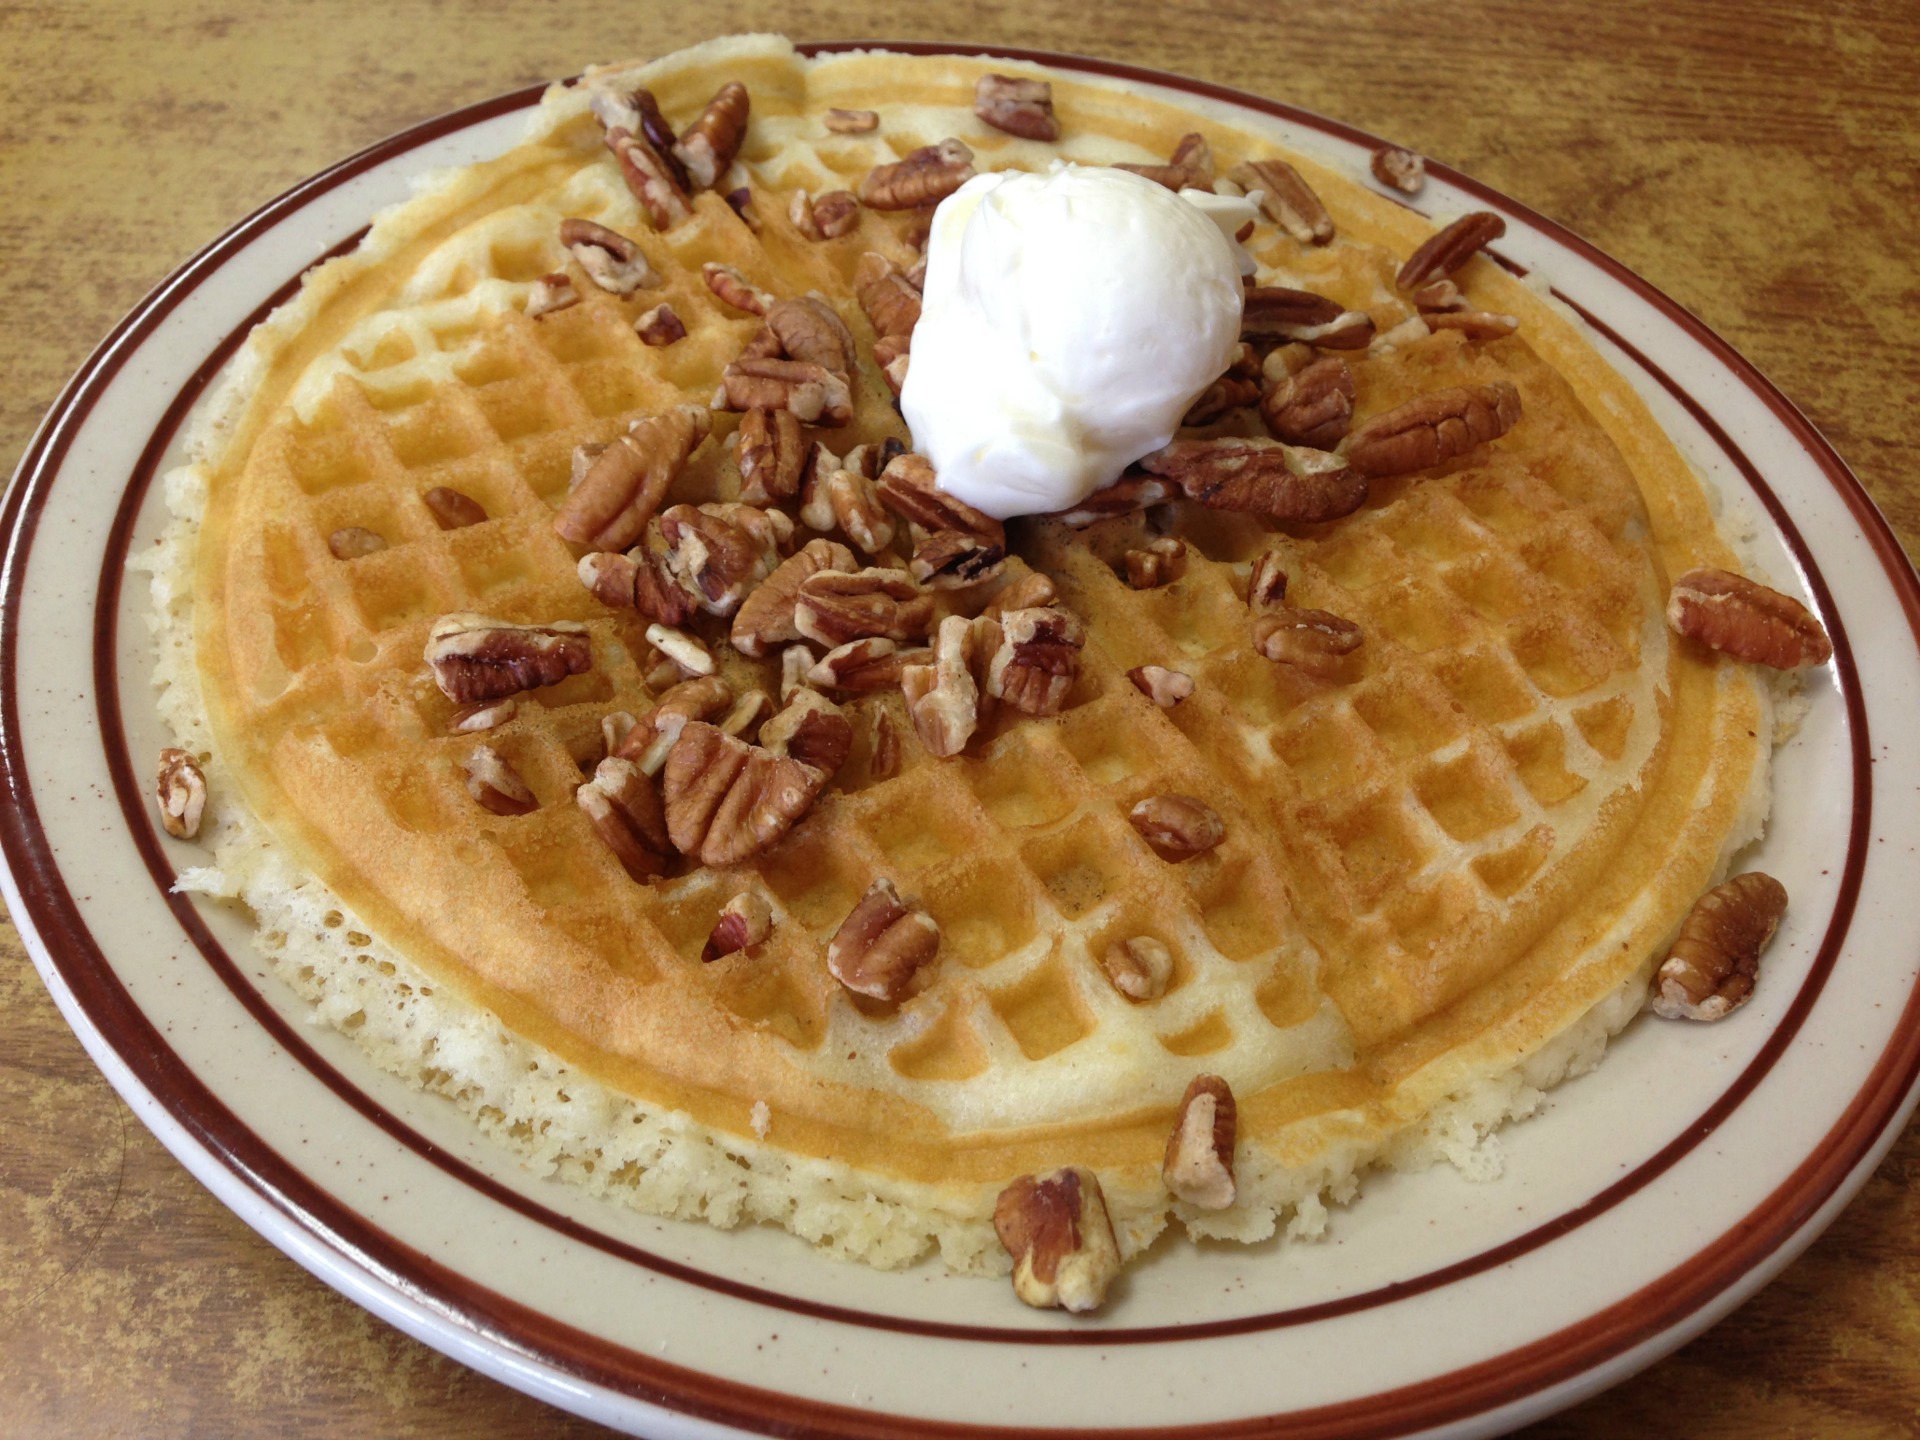 A pecan waffle from Ole's Waffle Shop.  